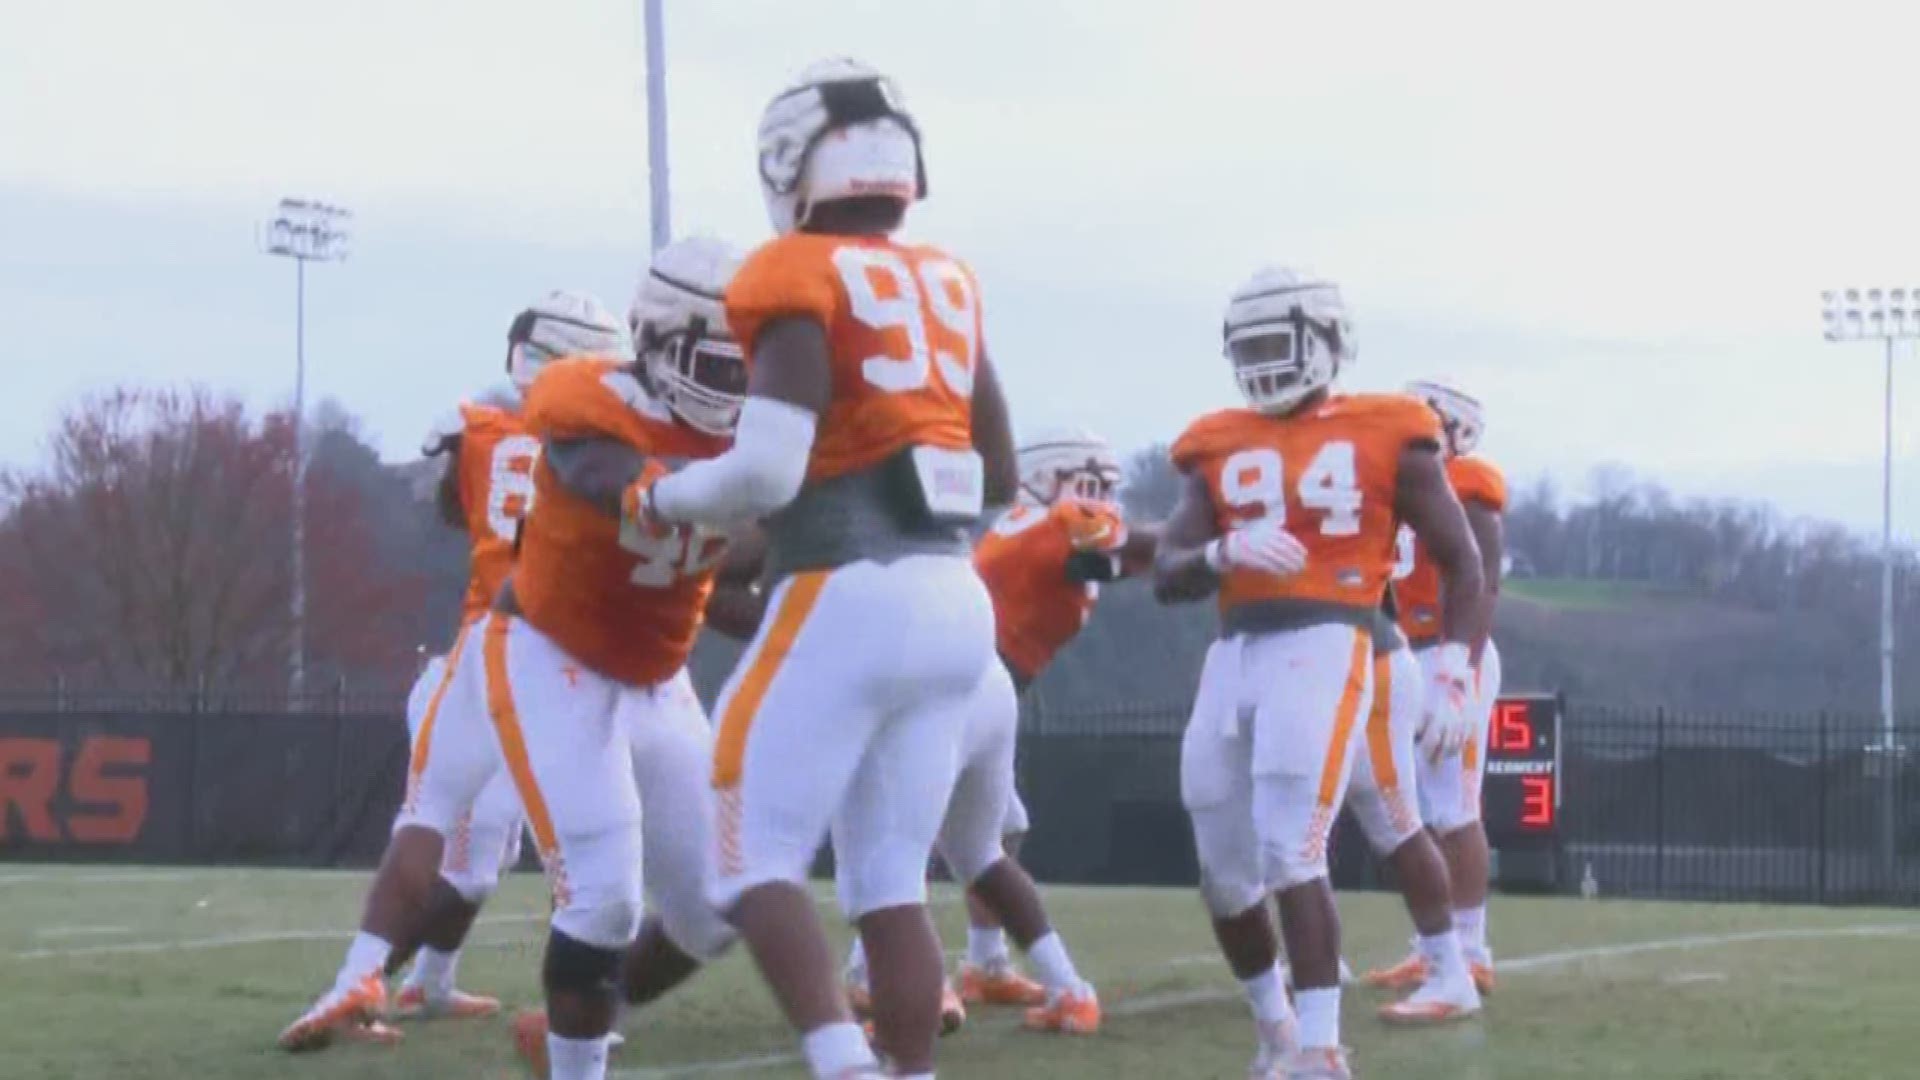 Spring practice just keeps on chugging along for the Vols.